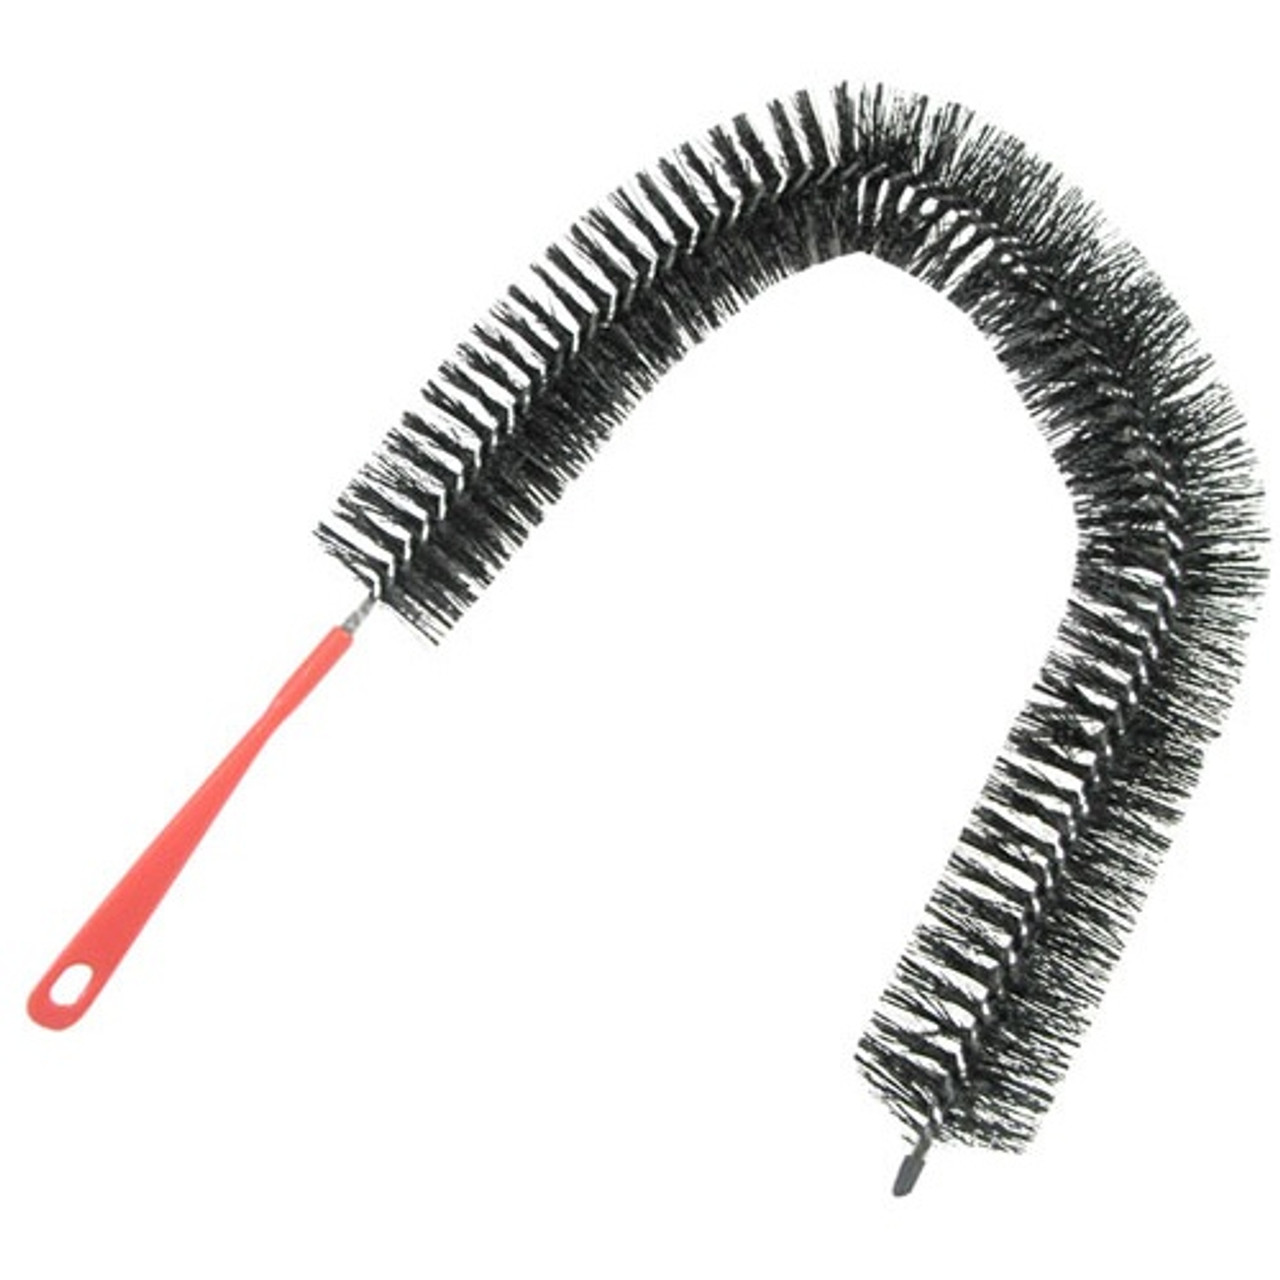 Appliance Cleaning Brush